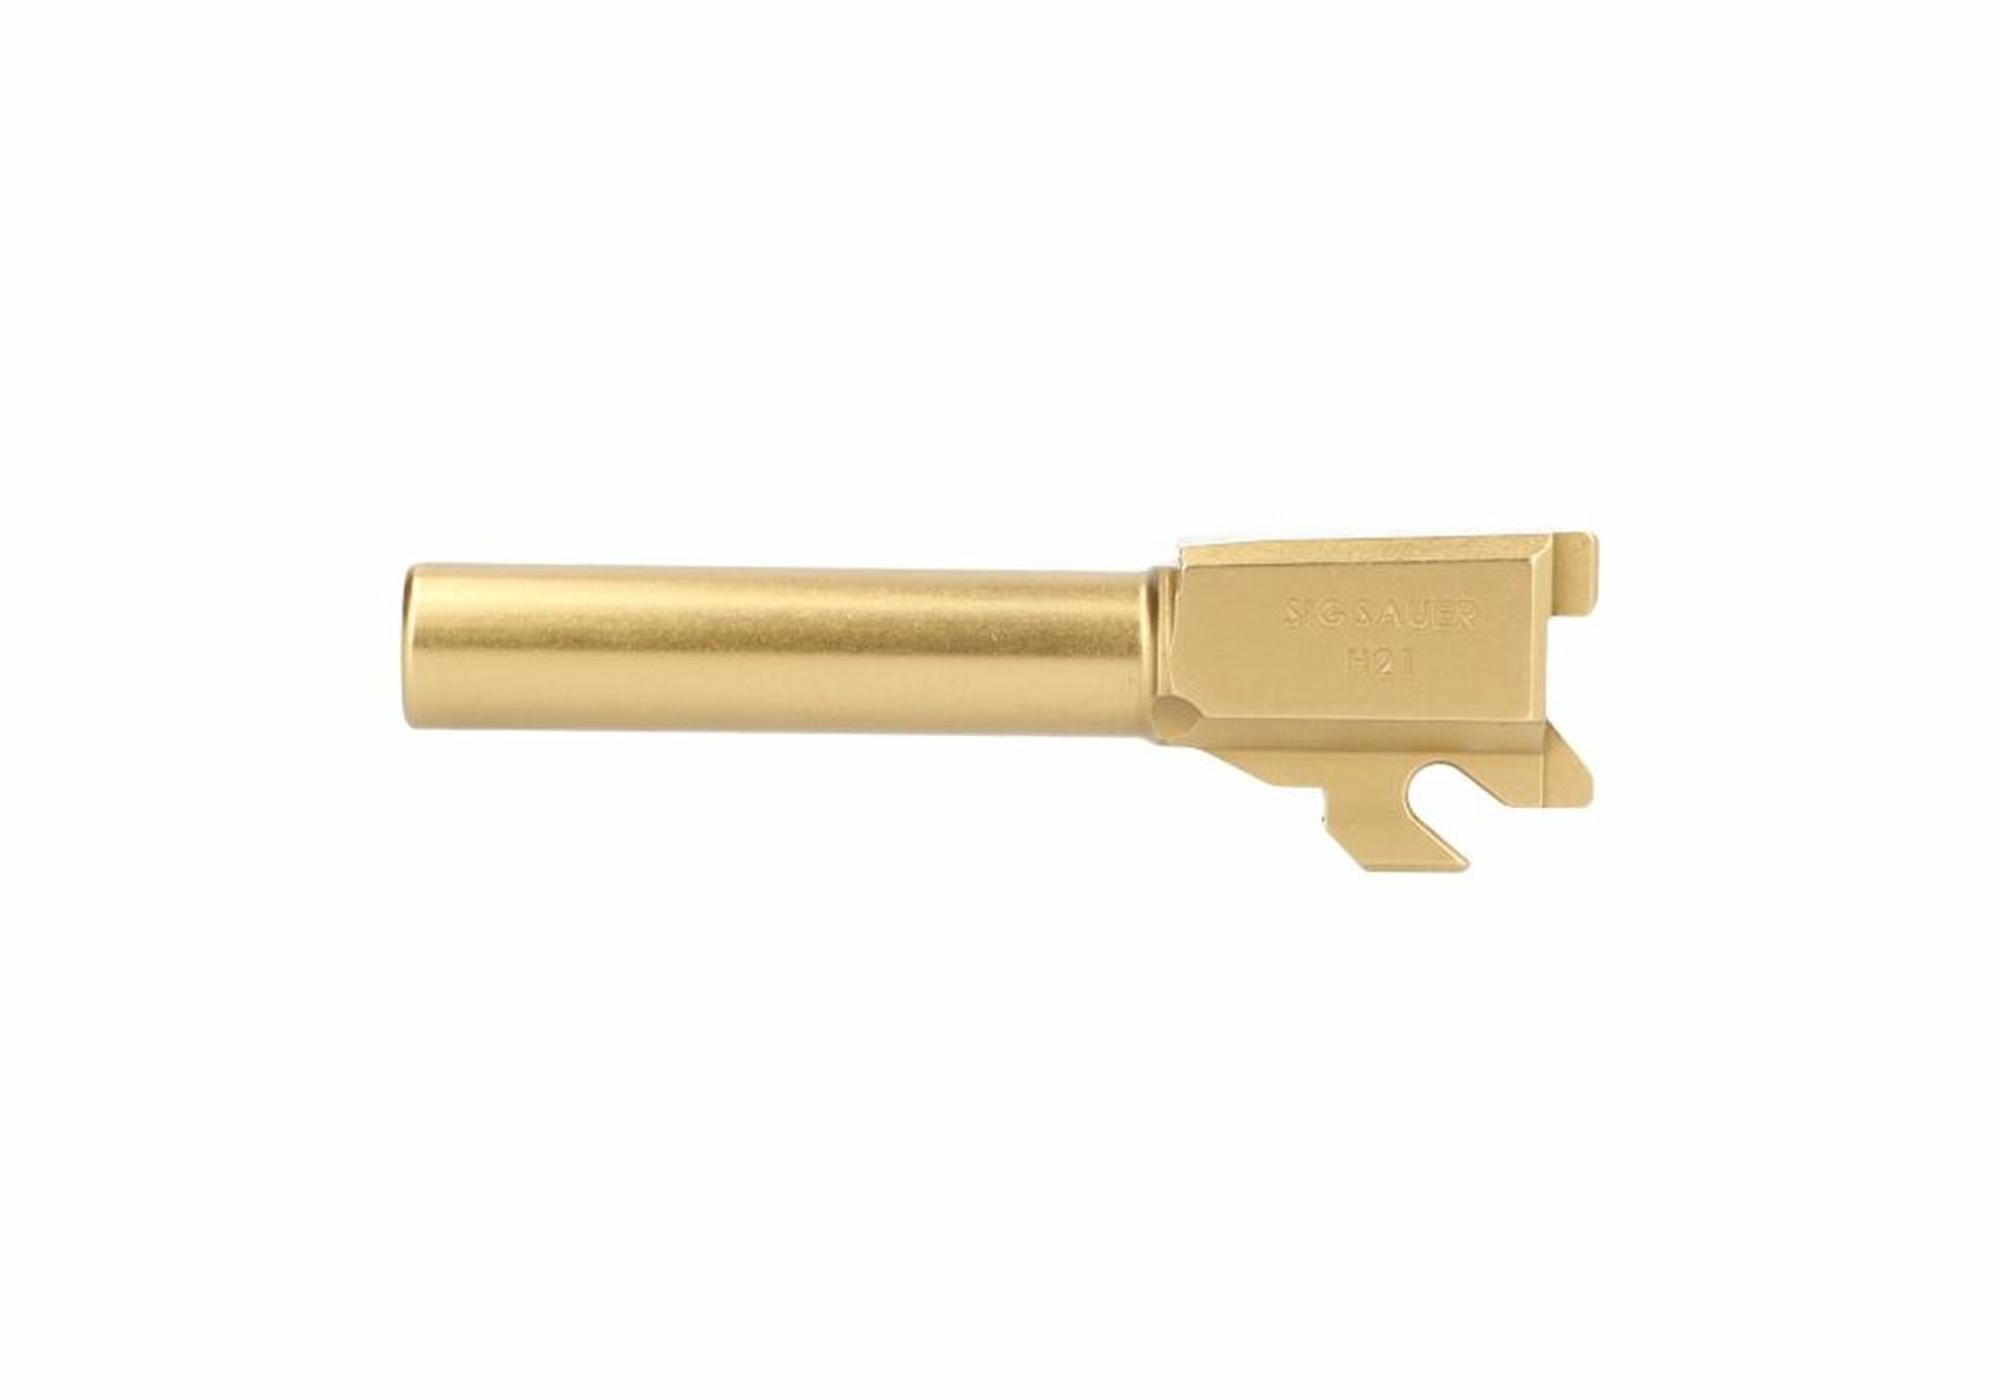  P320 9mm 3.9 ` Gold